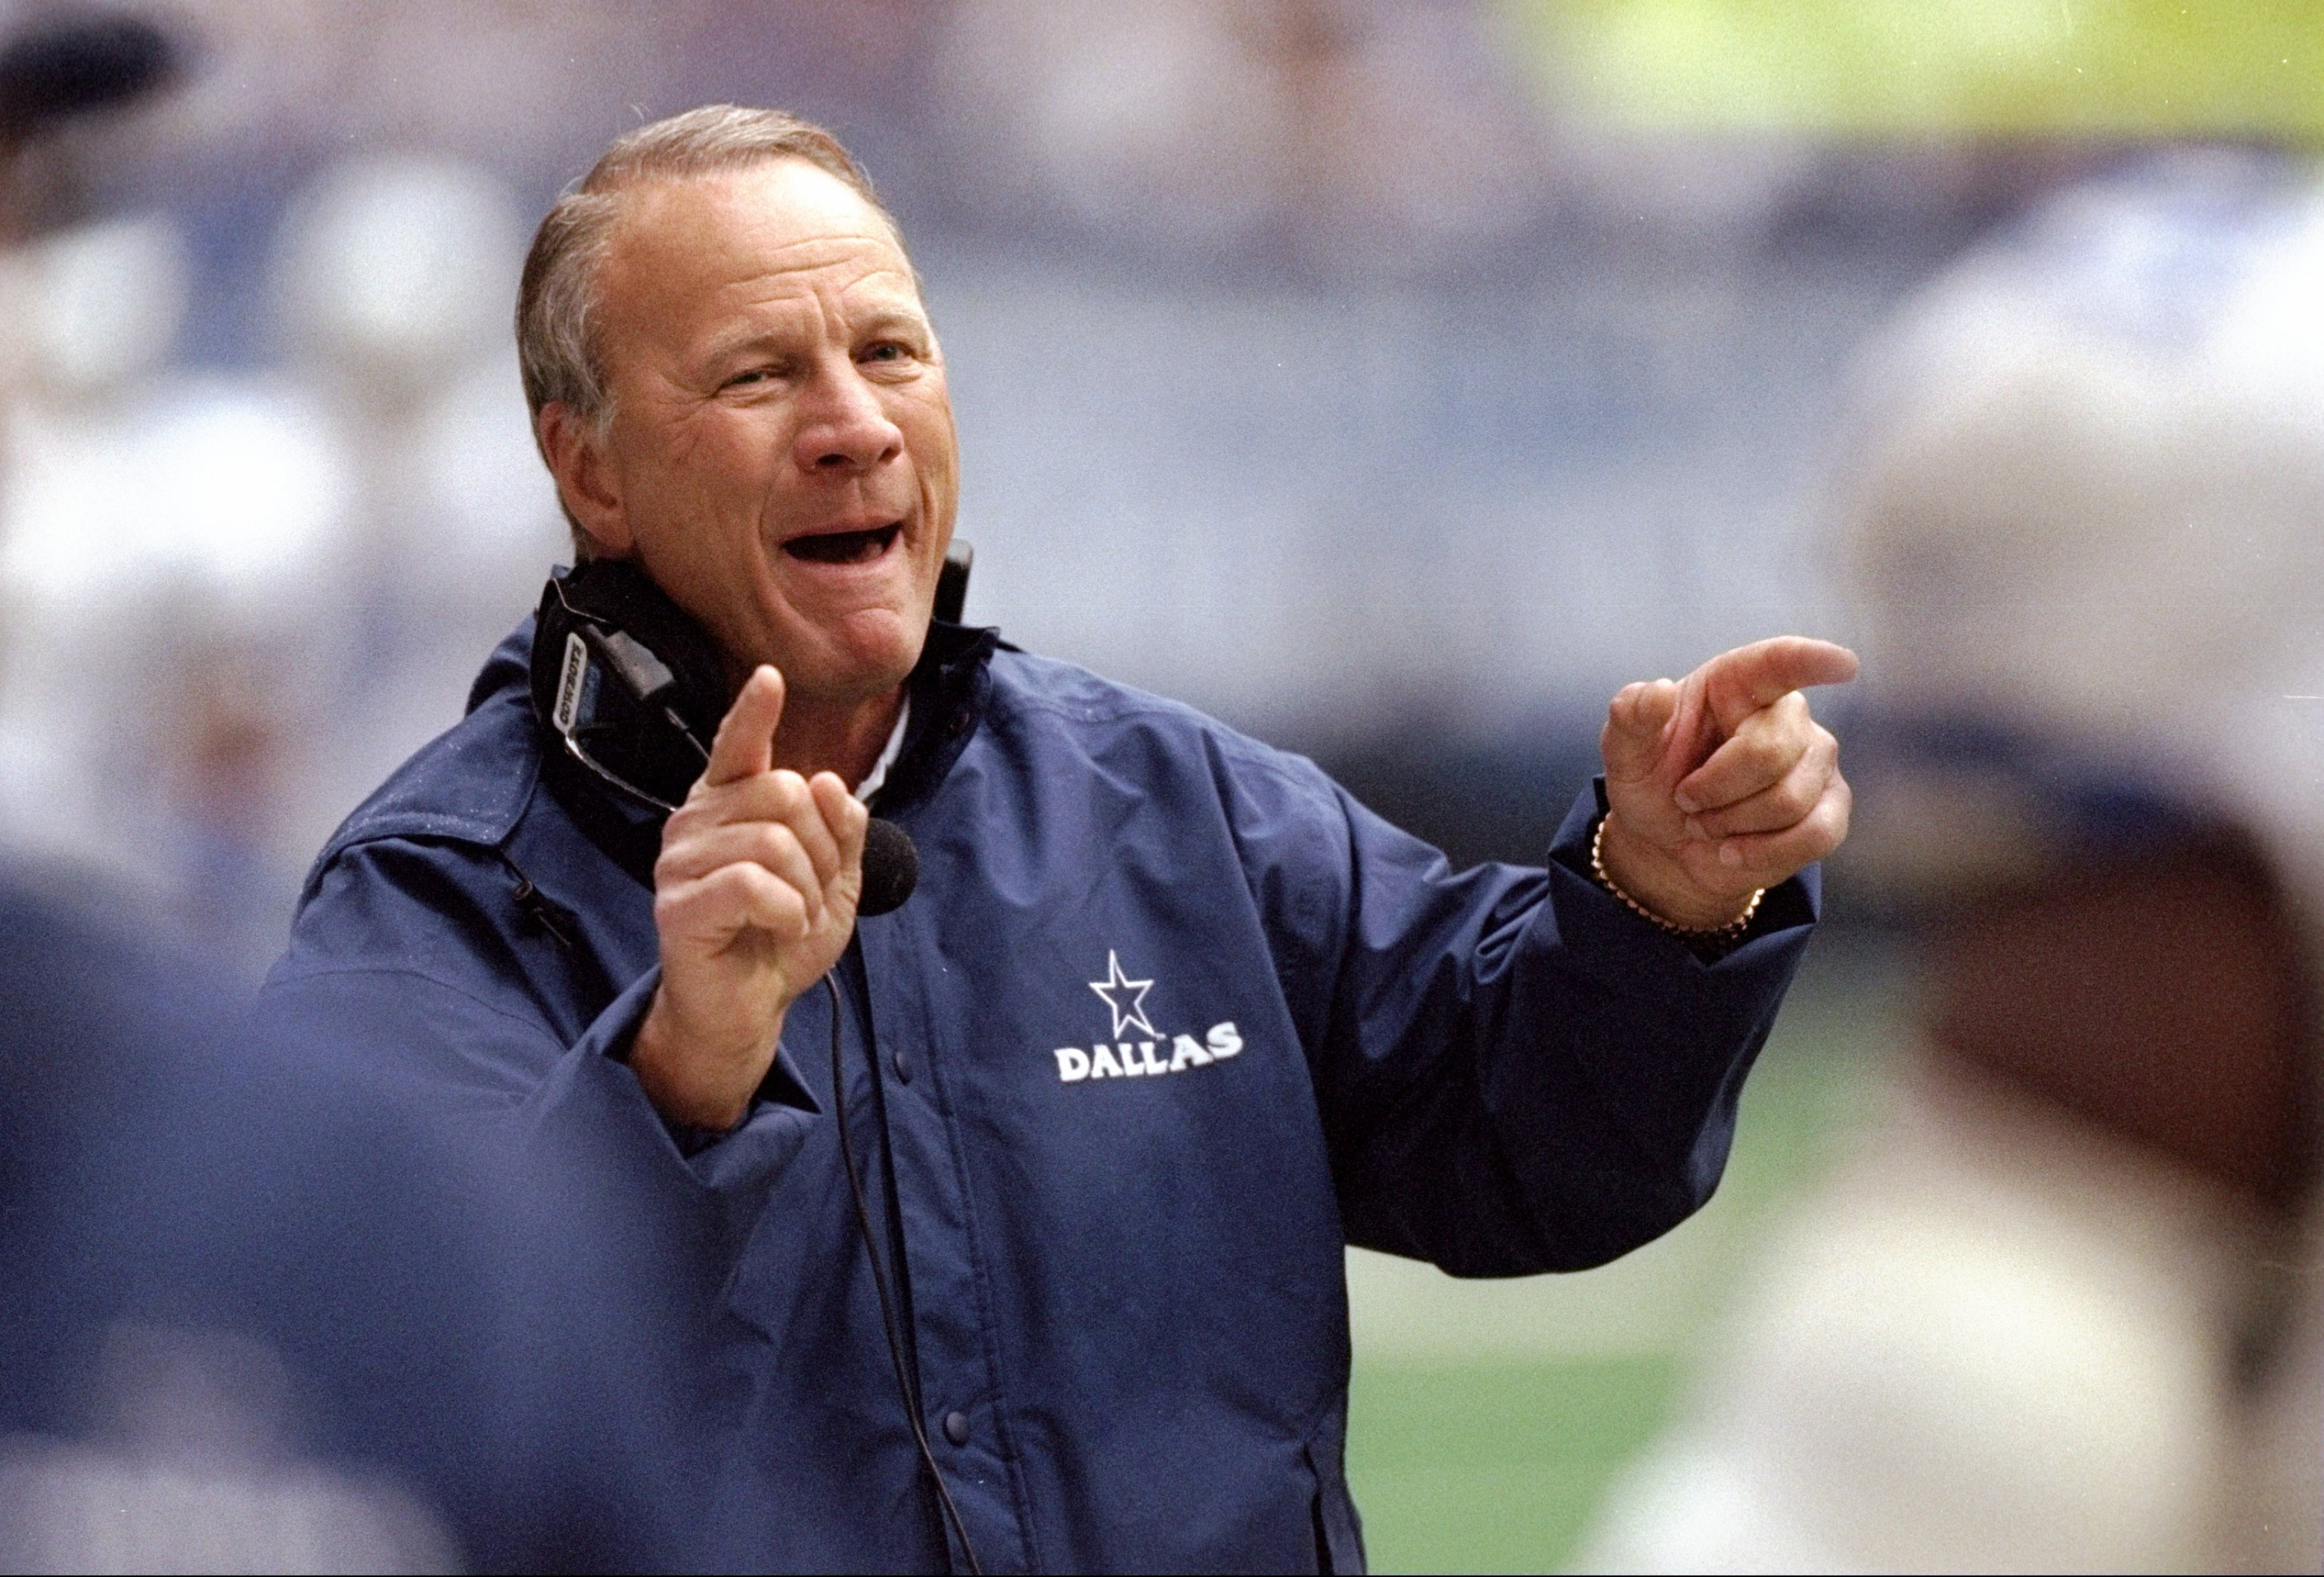 Barry Switzer on X: You can bet your ass I can! / X